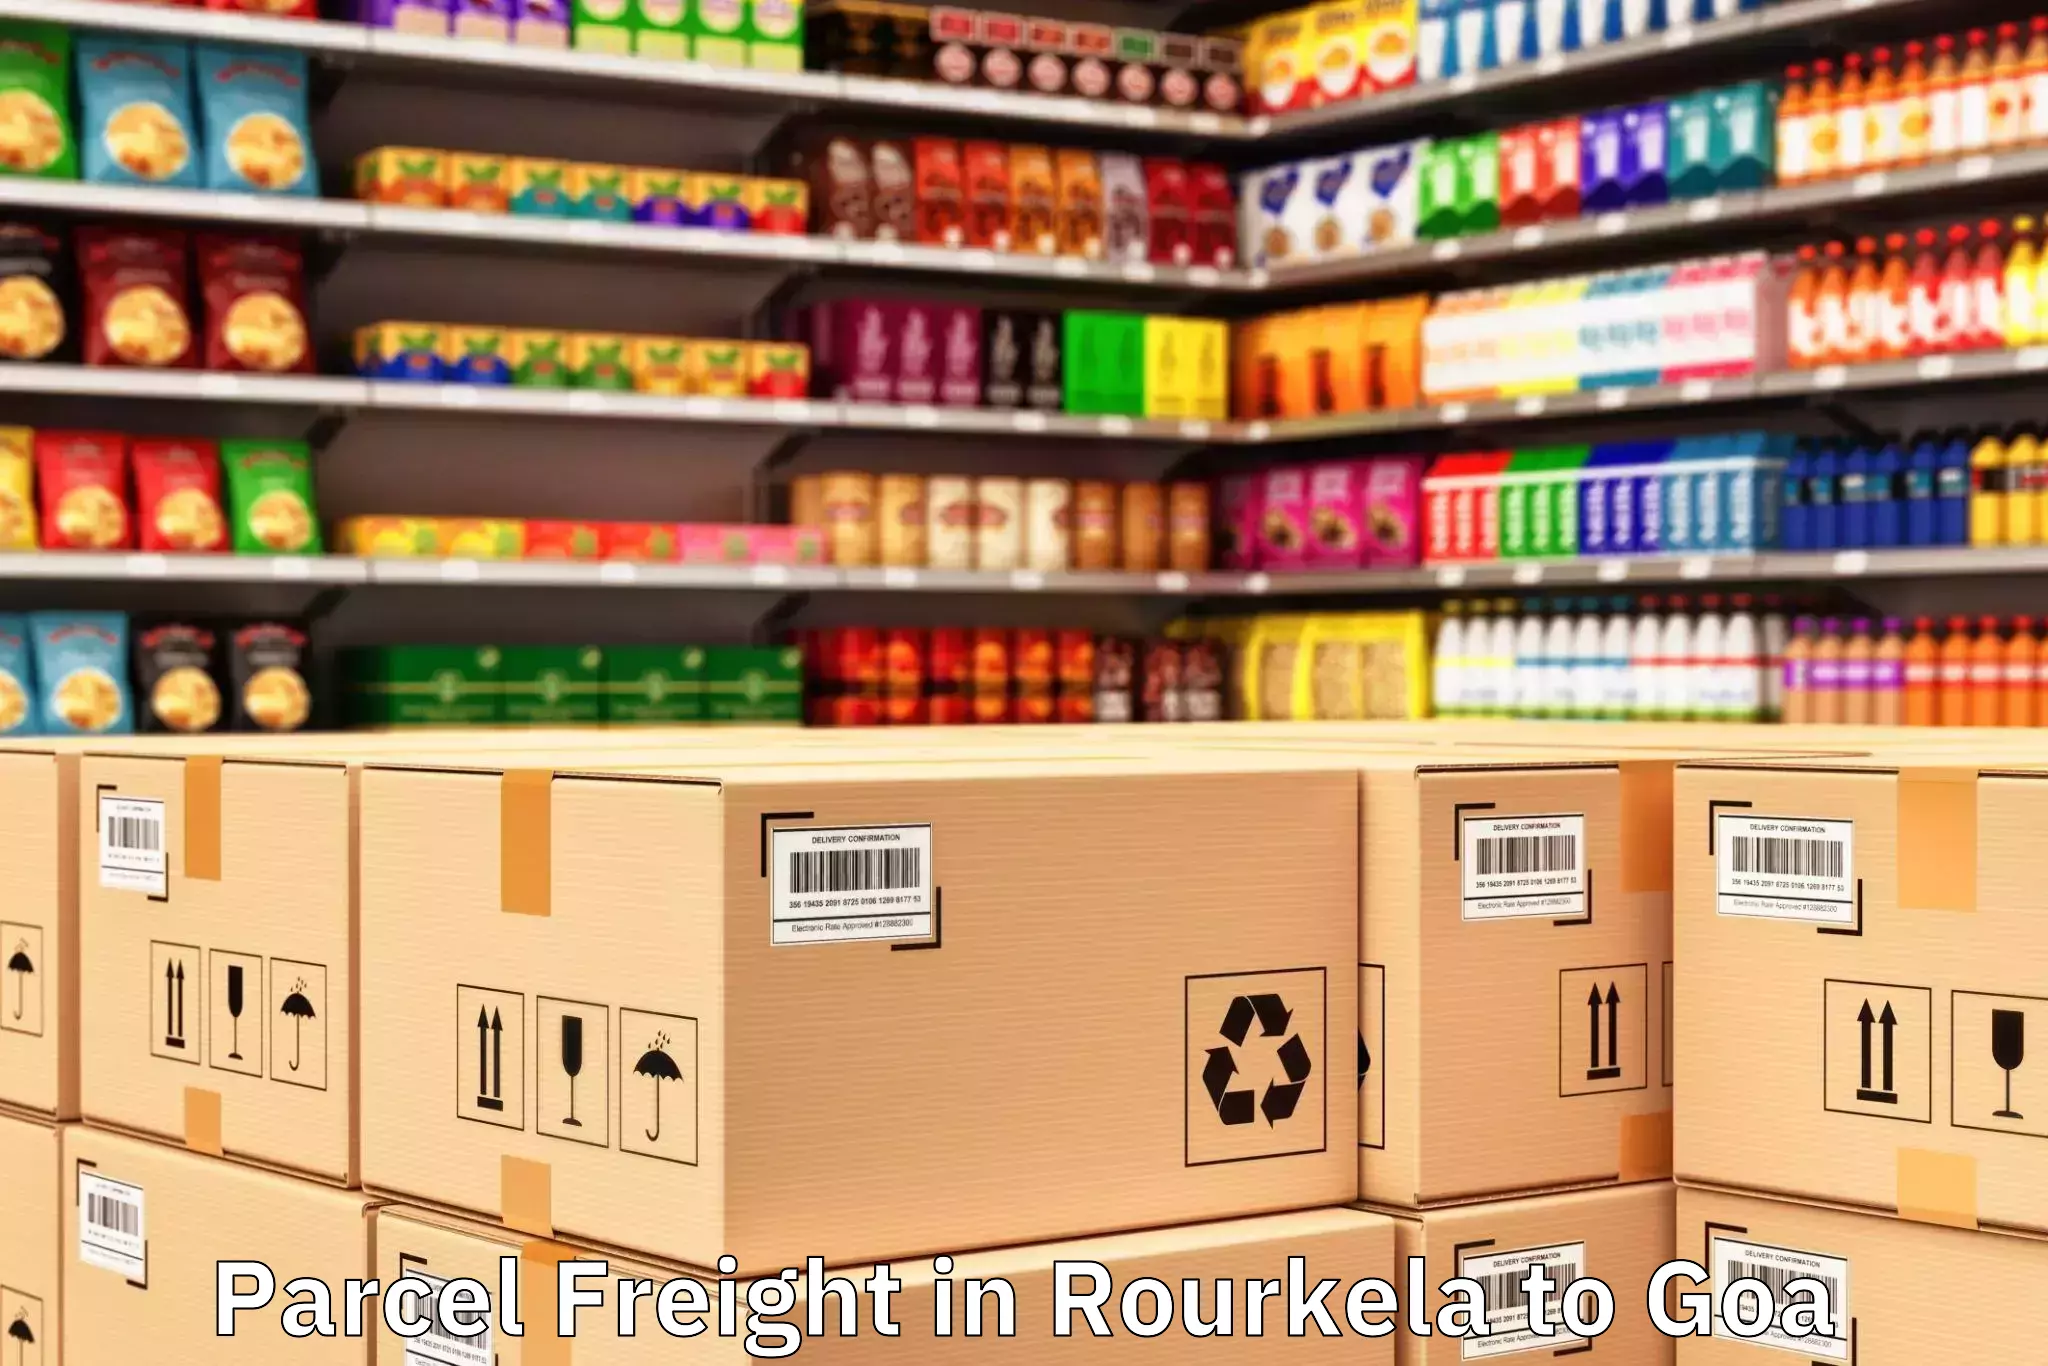 Top Rourkela to Goa Parcel Freight Available